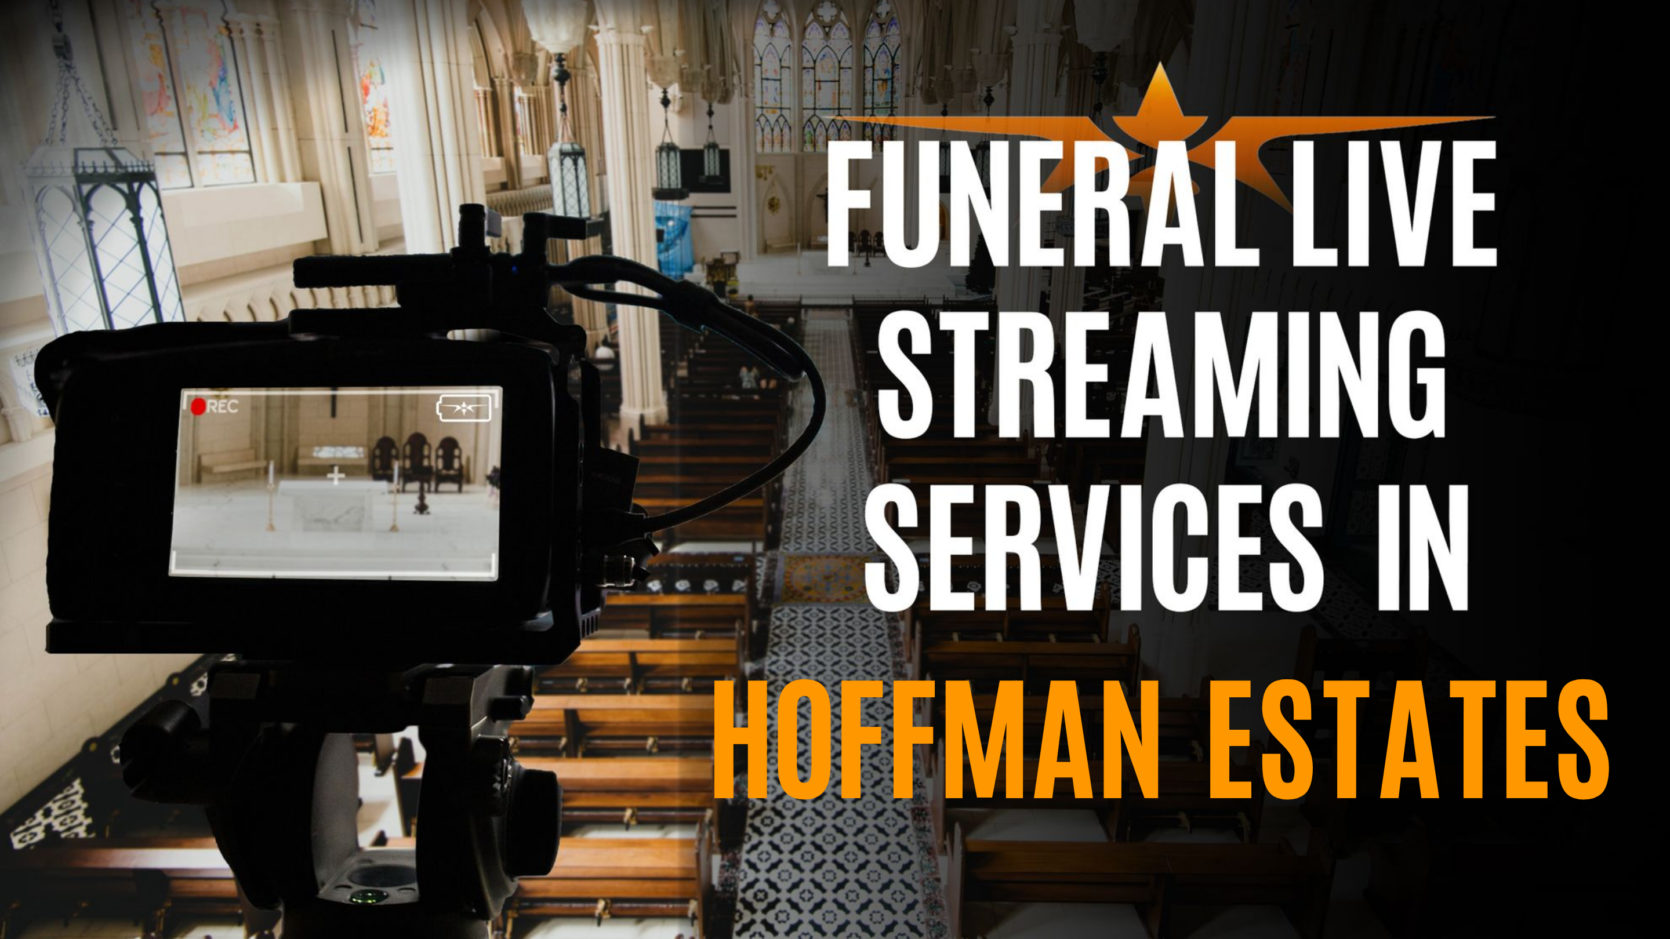 Funeral Live Streaming Services in Hoffman Estates